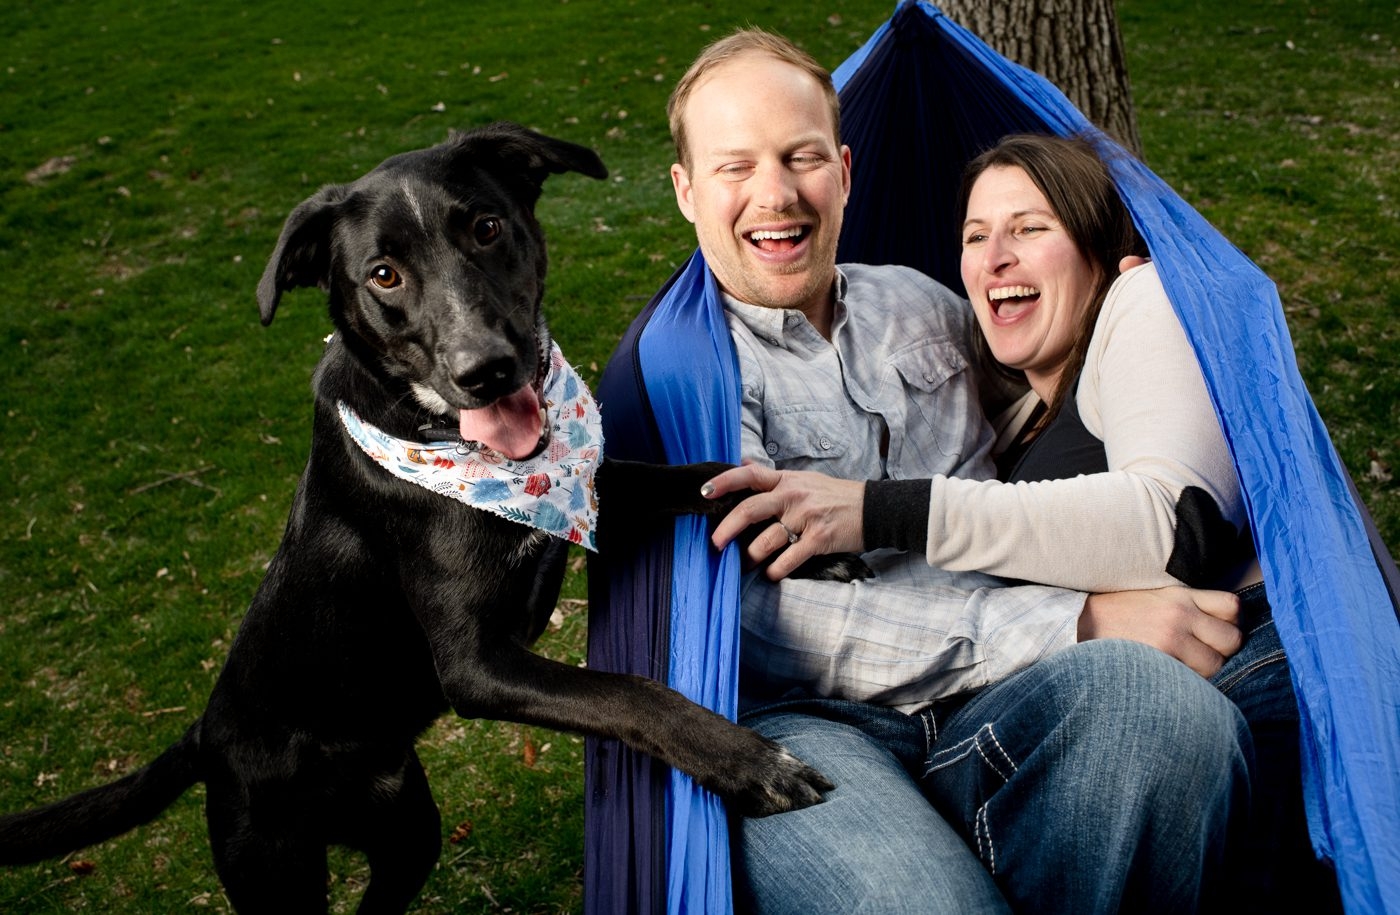 Engaged-Couple-in-Hammock-surprised-by-Dog-Jump